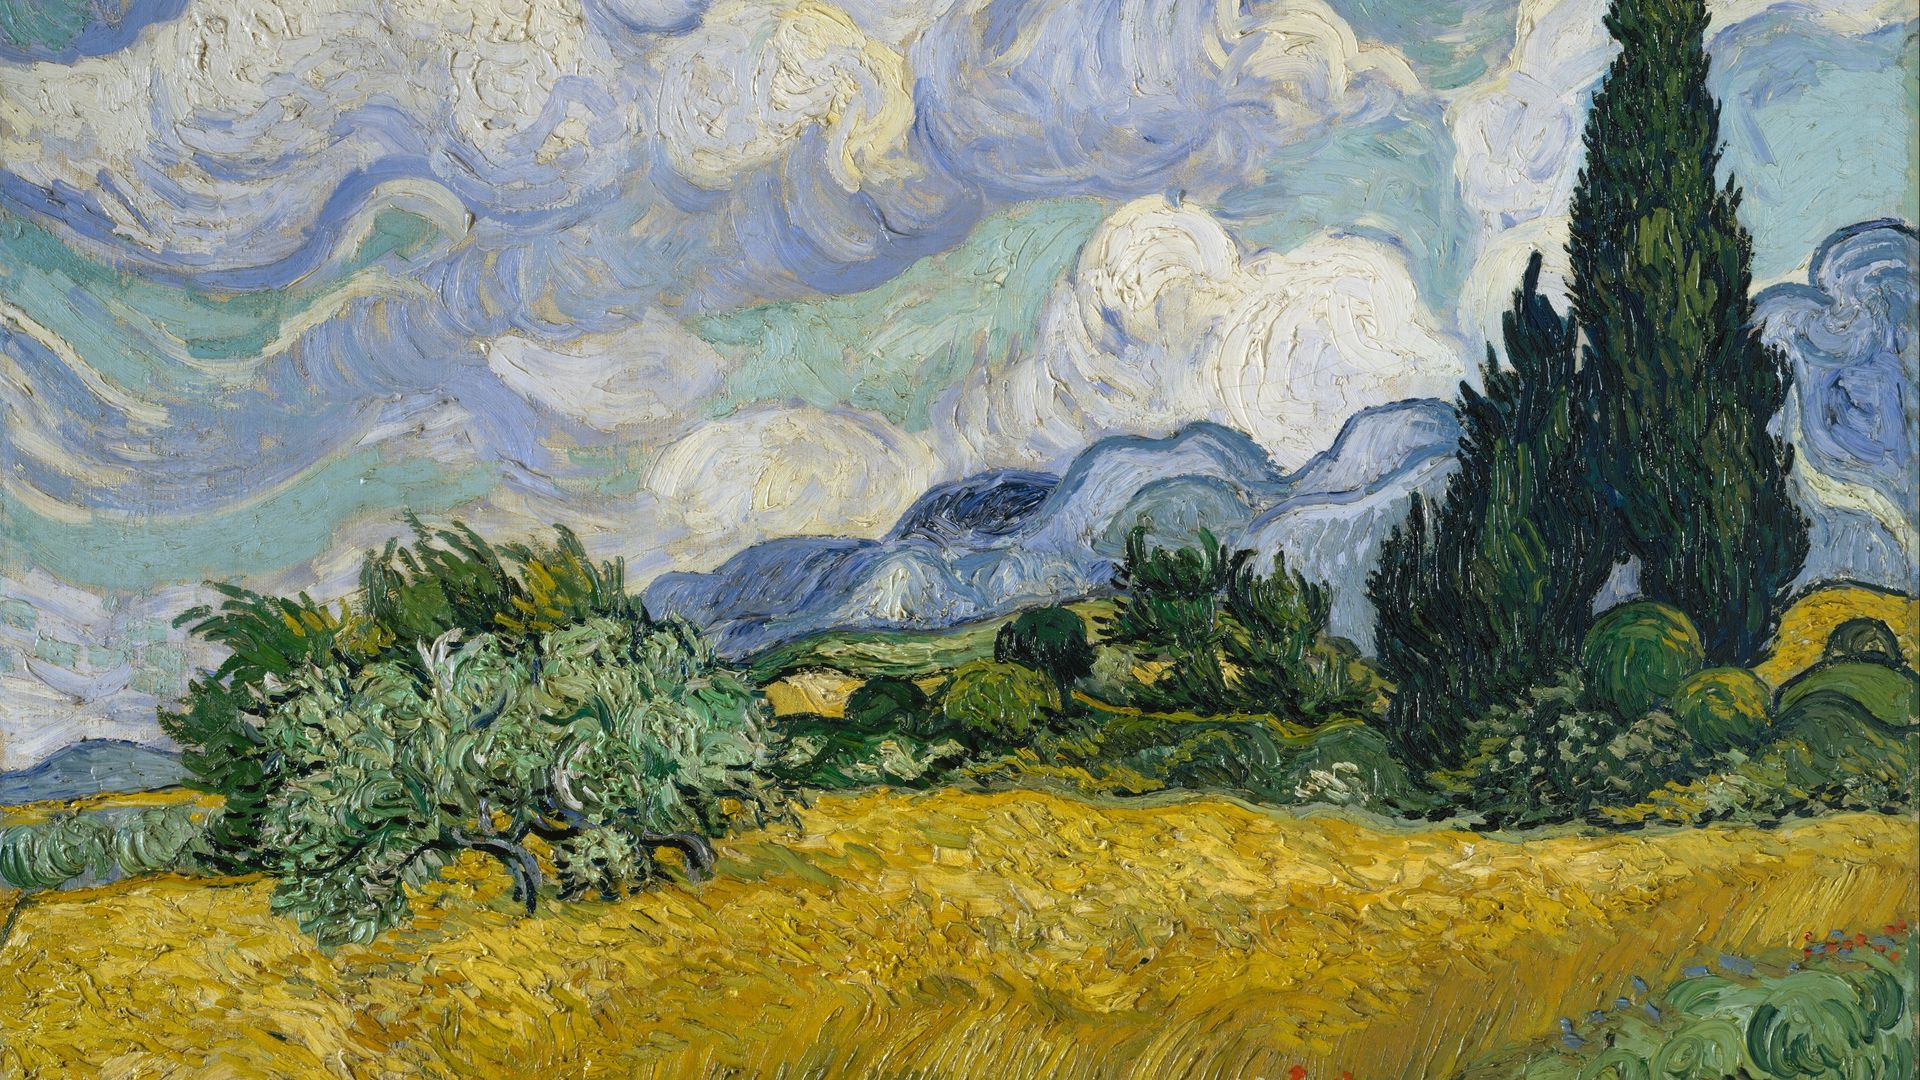 Download these beautiful Van Goghinspired wallpapers for your iPhone  iPad and Mac